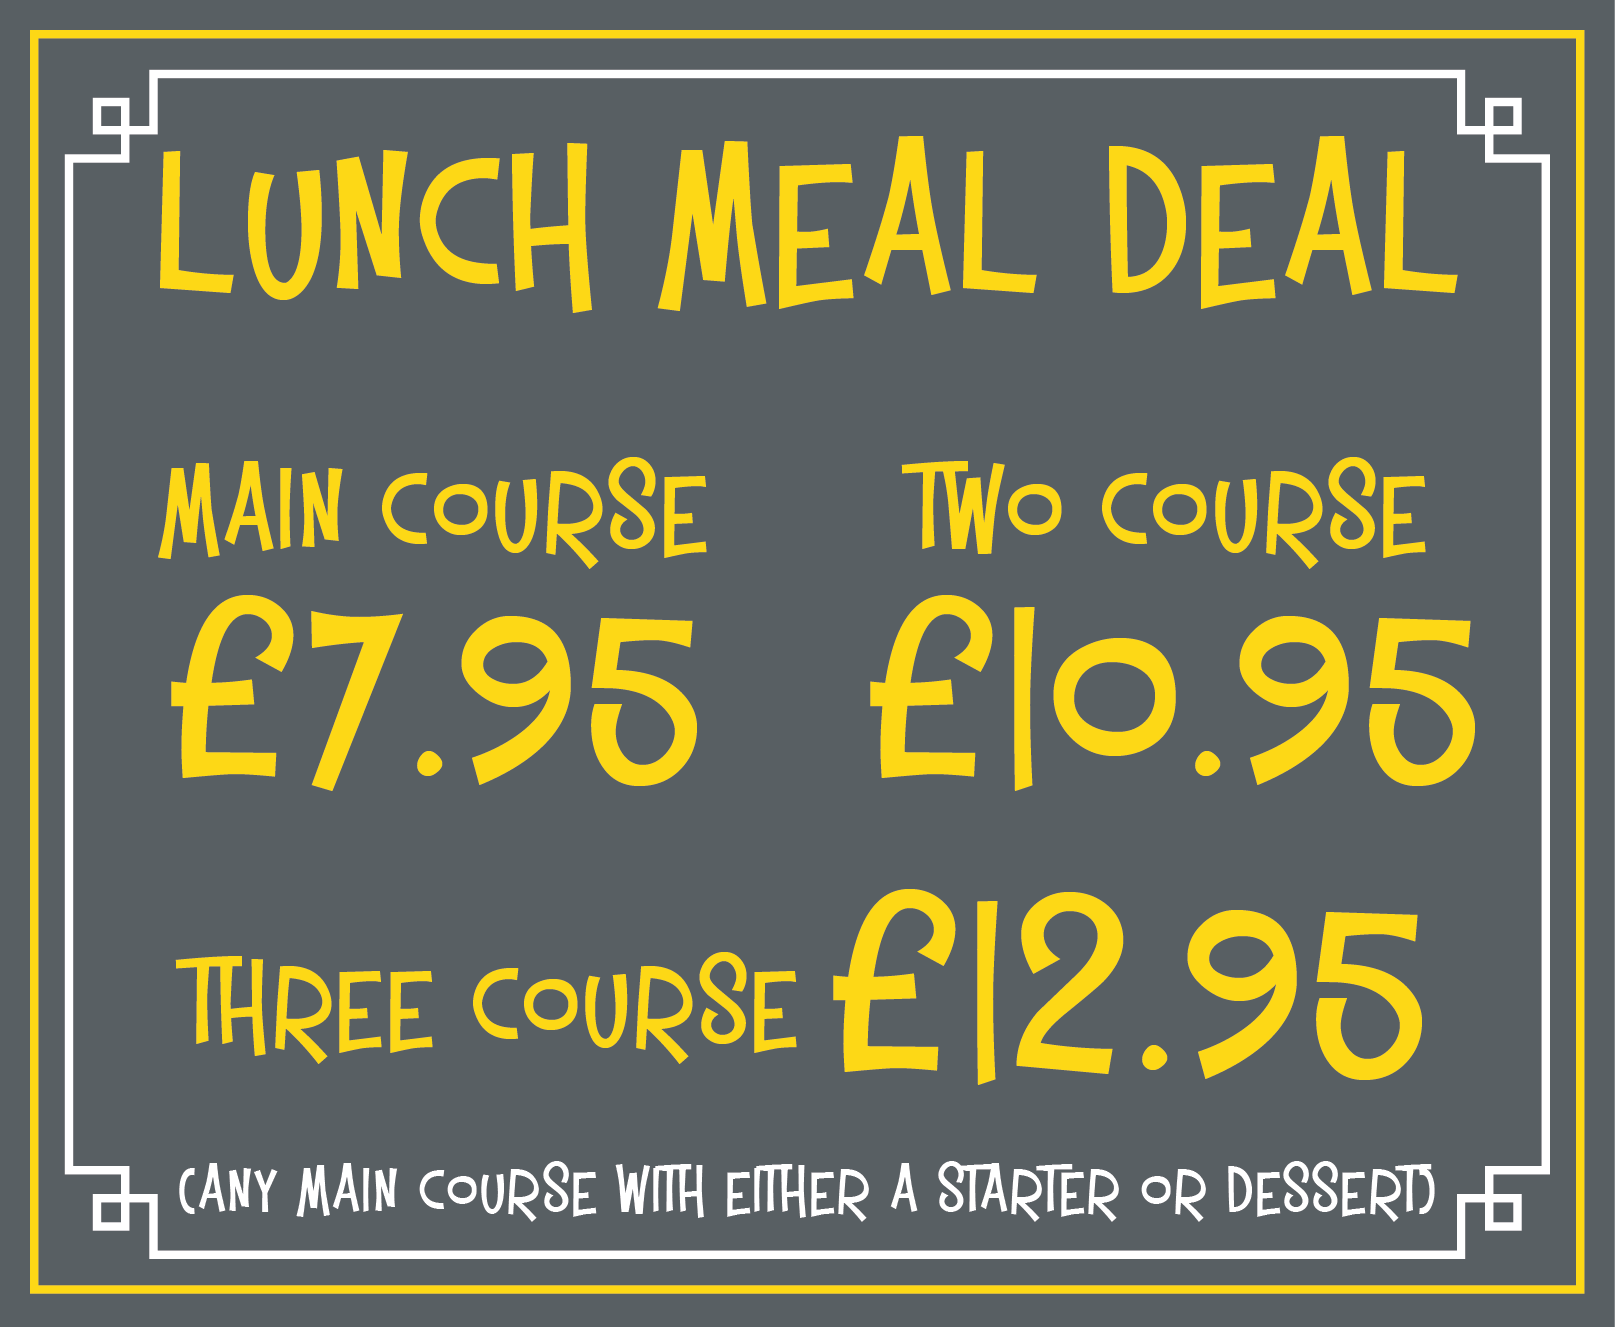 Peepo Lunch Meal Deal